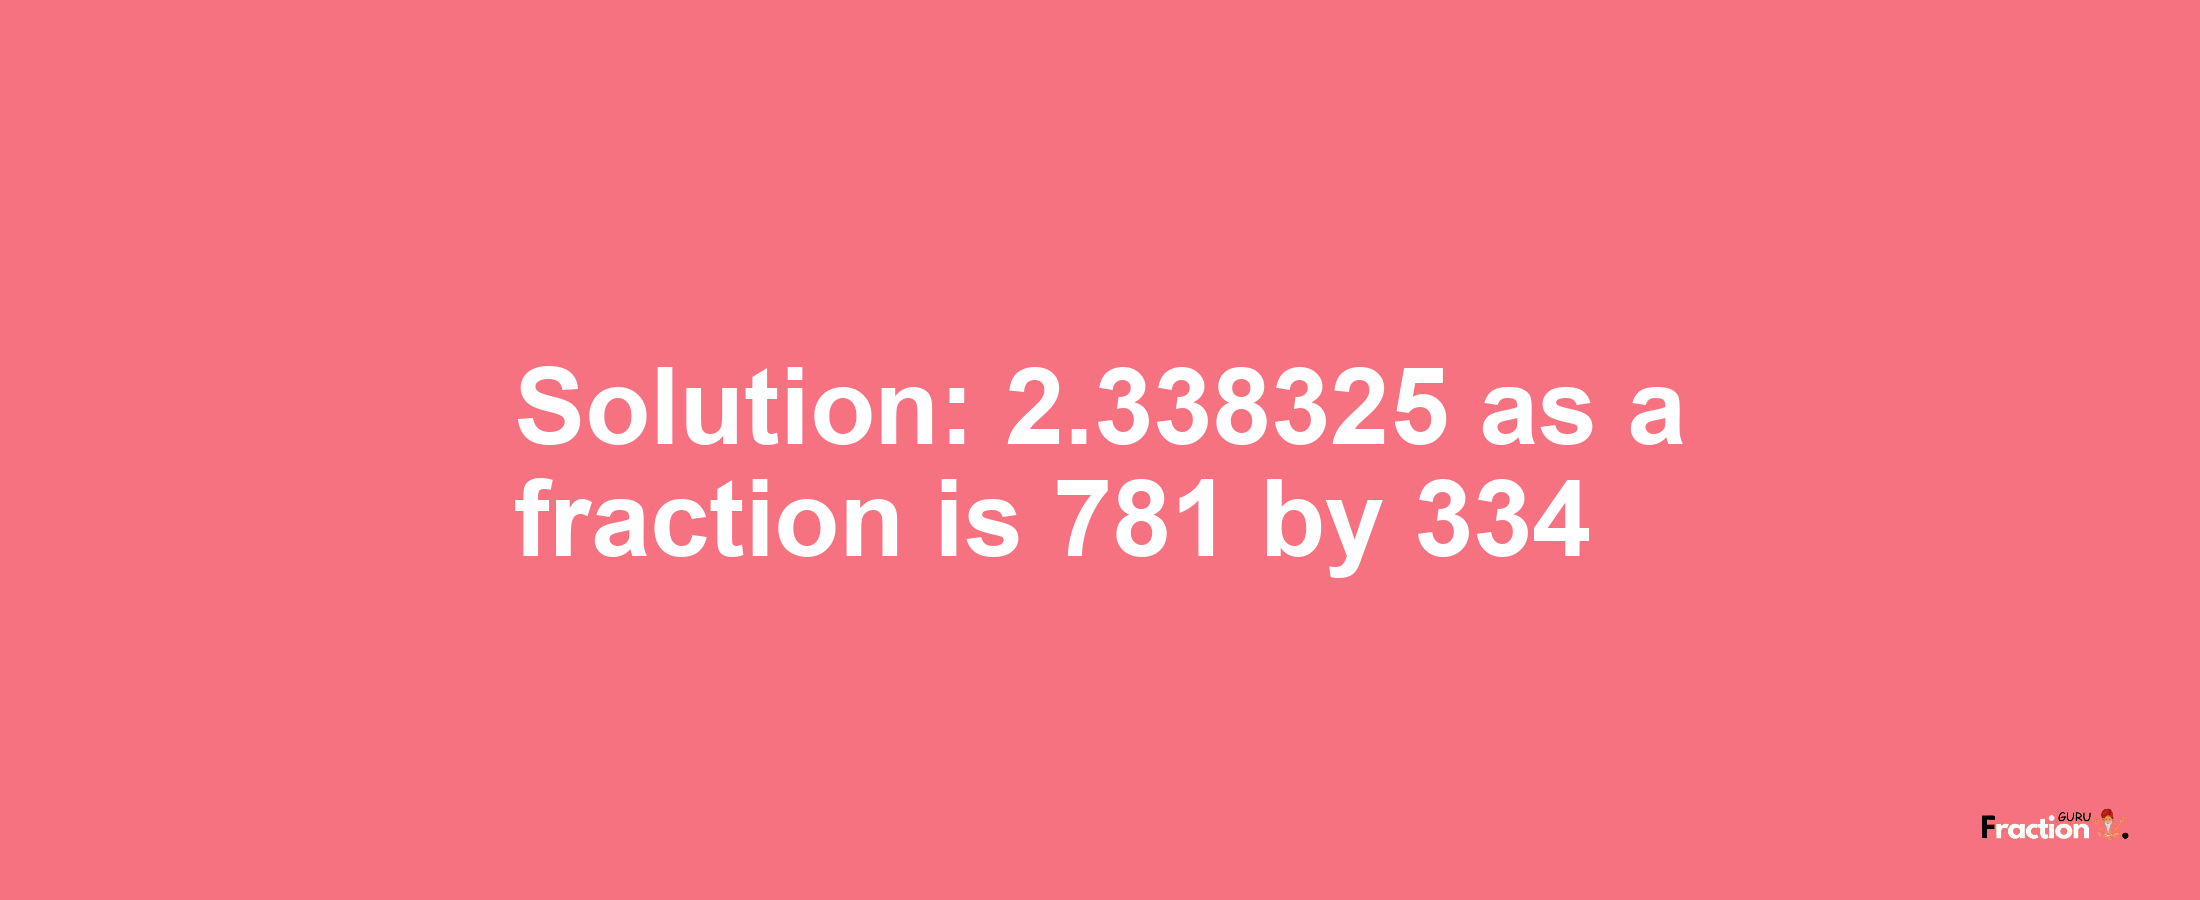 Solution:2.338325 as a fraction is 781/334